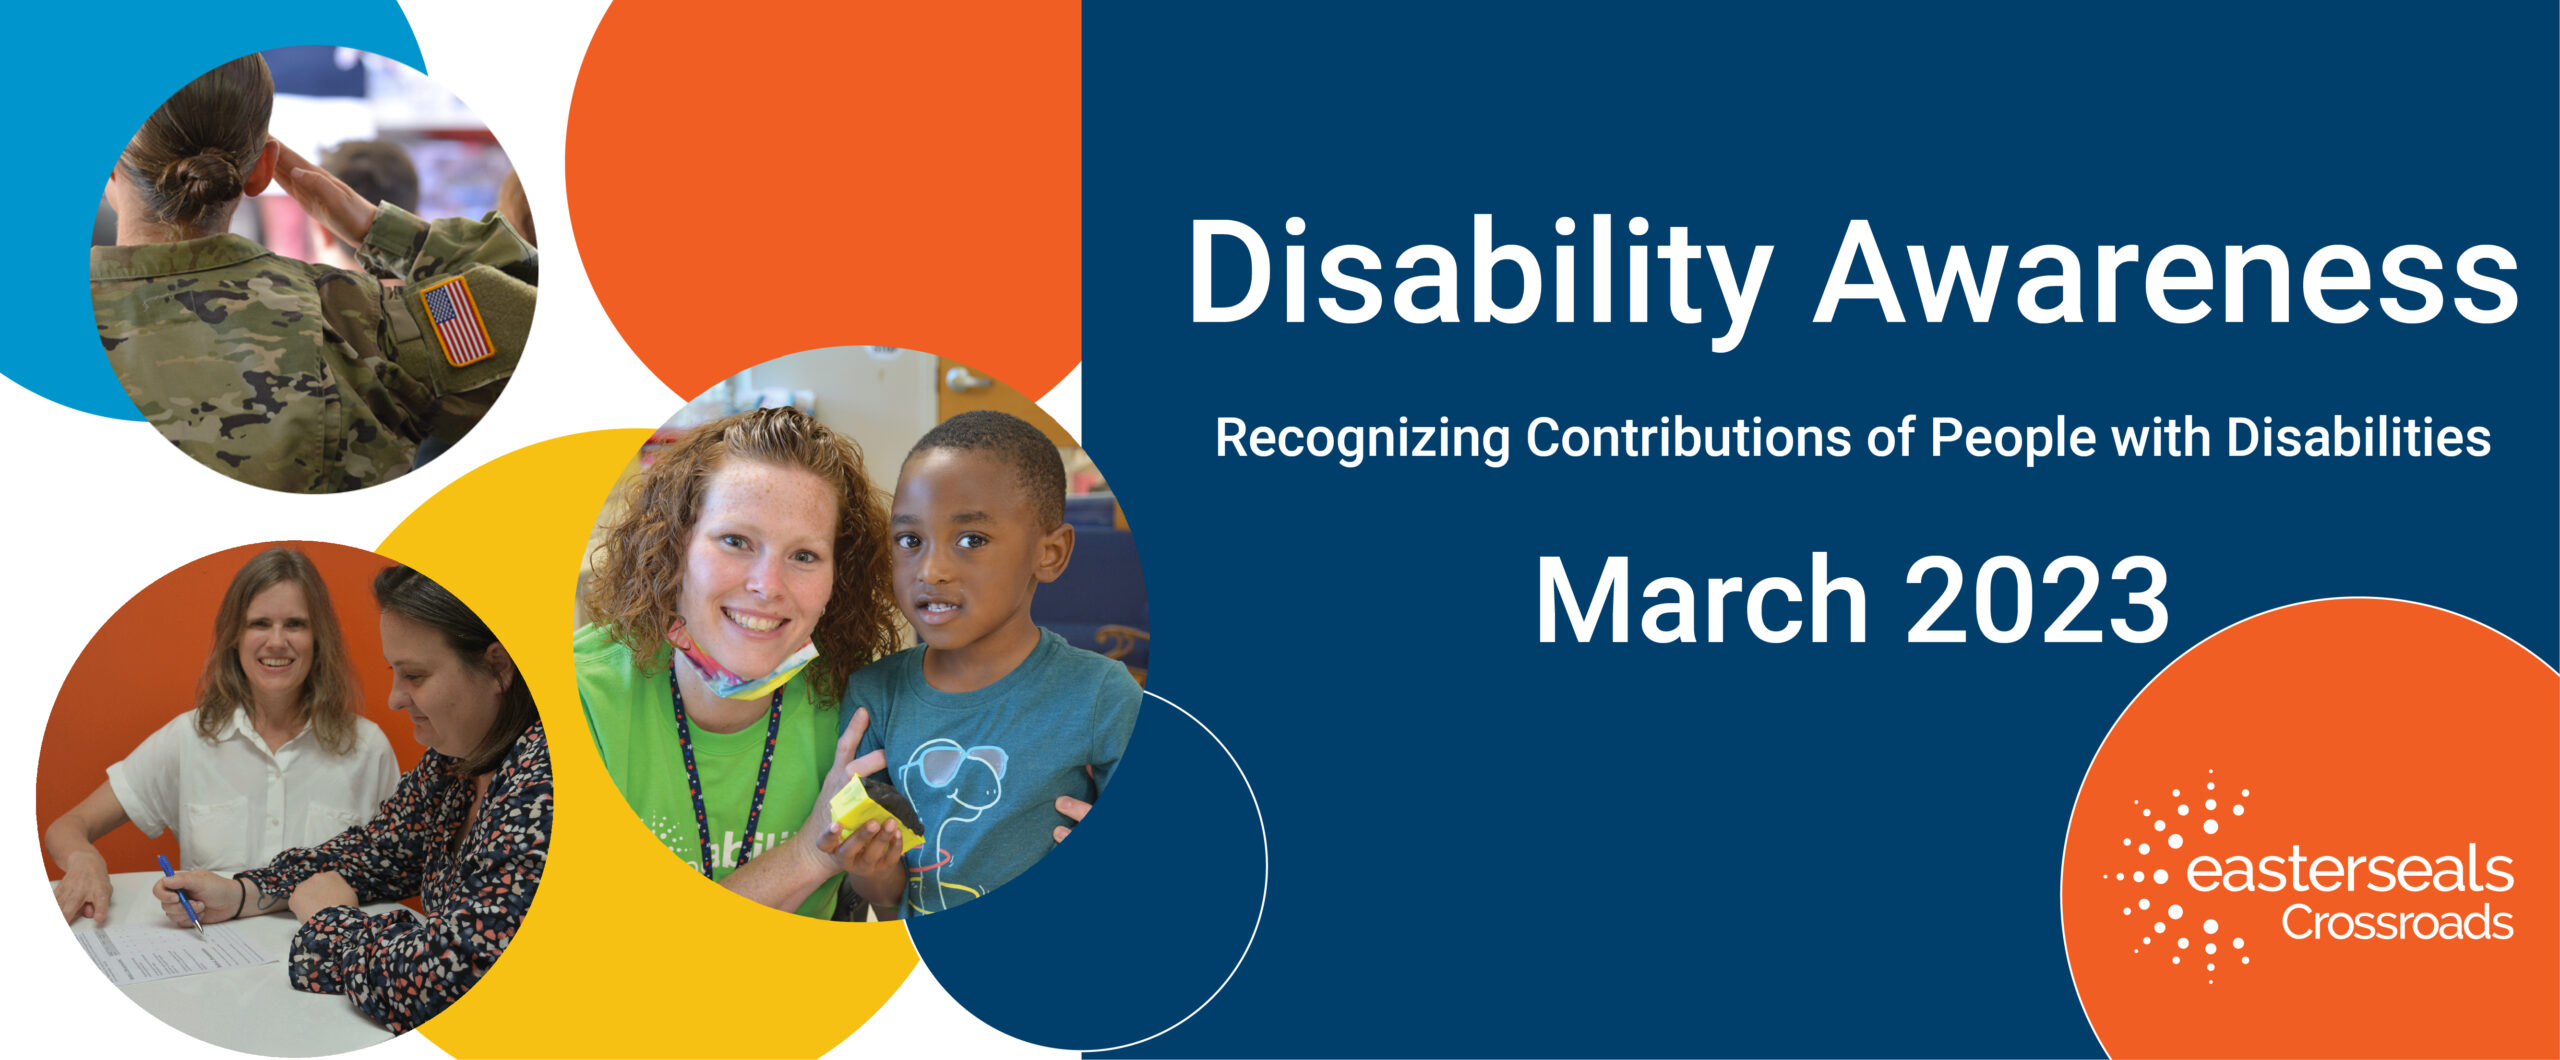 words disability awareness March 2023 and colorful circle images of adults and children